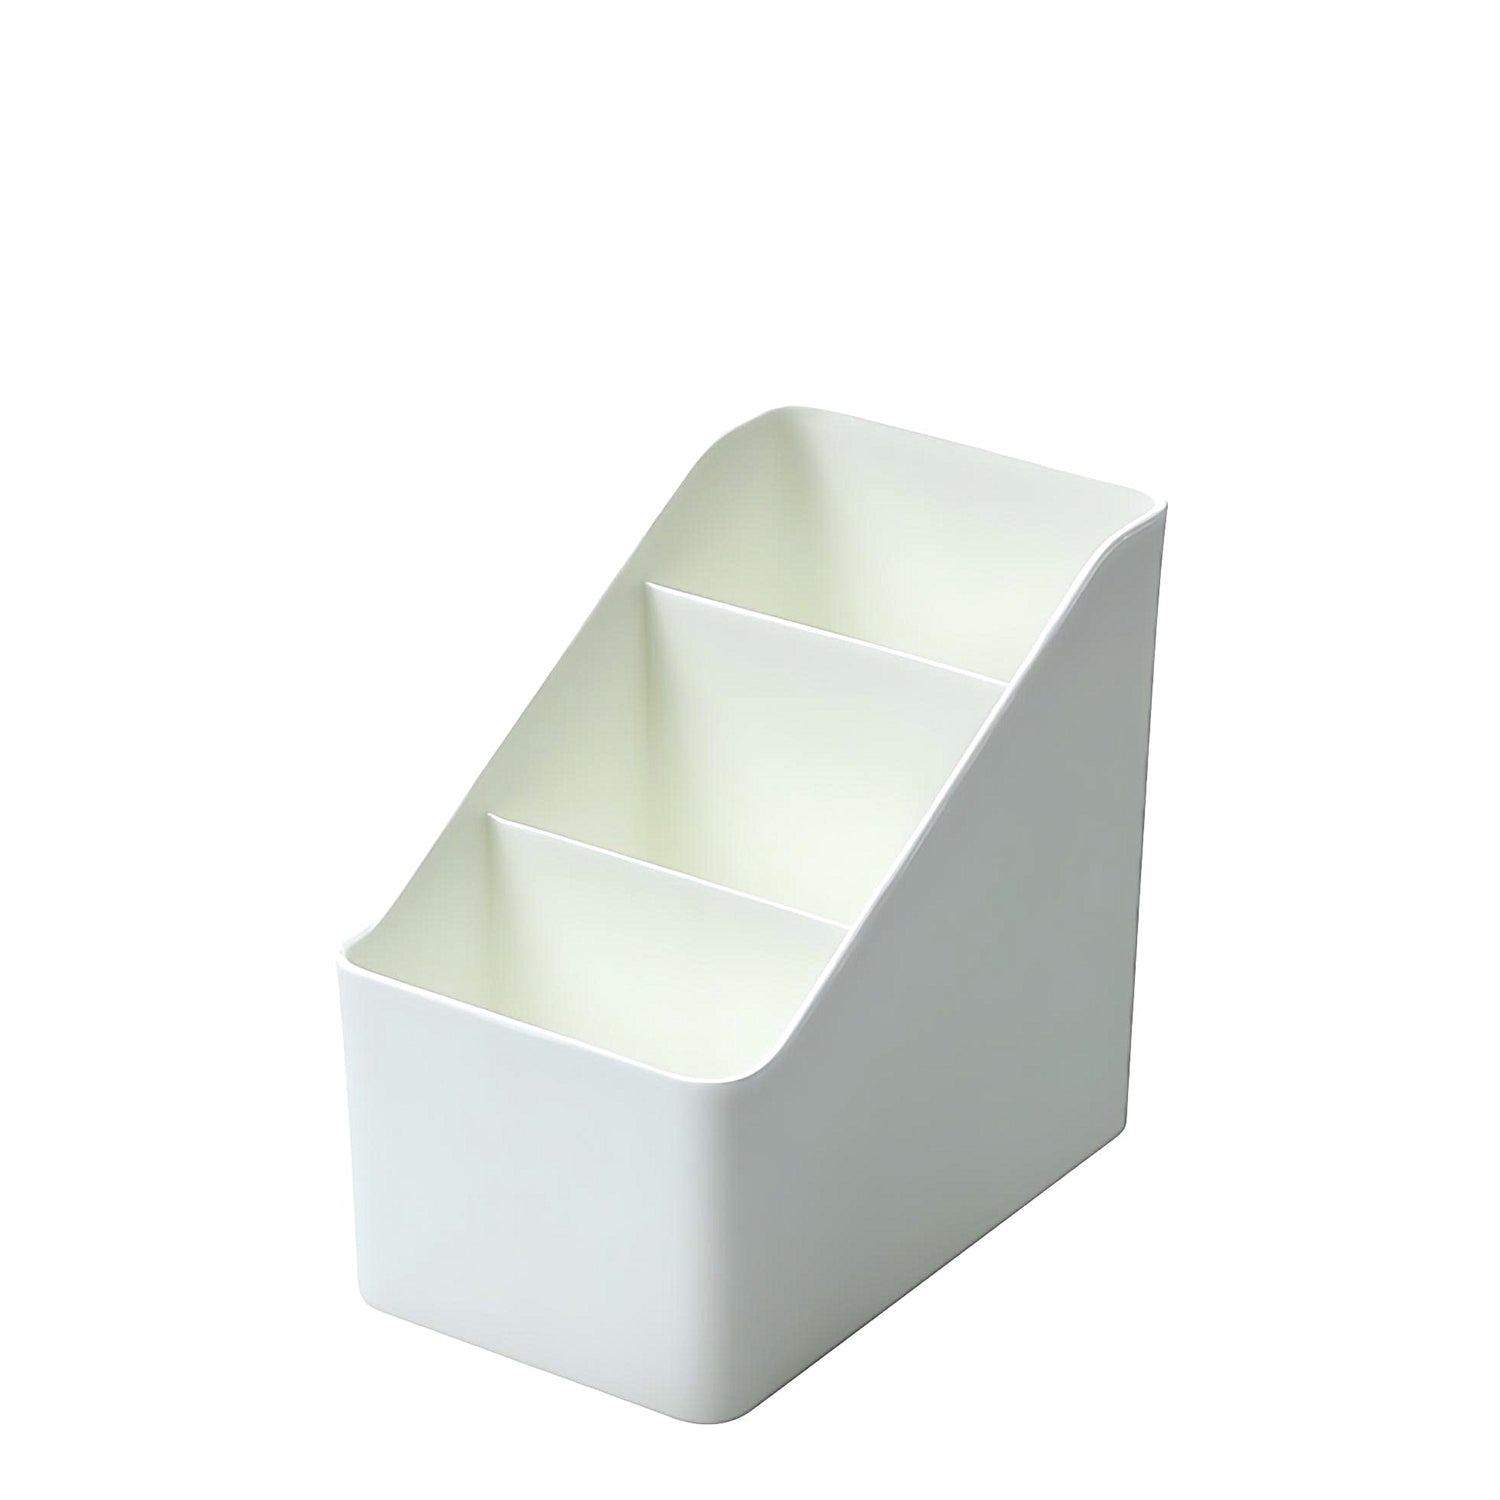 a white desktop organizer with three compartments on a white background